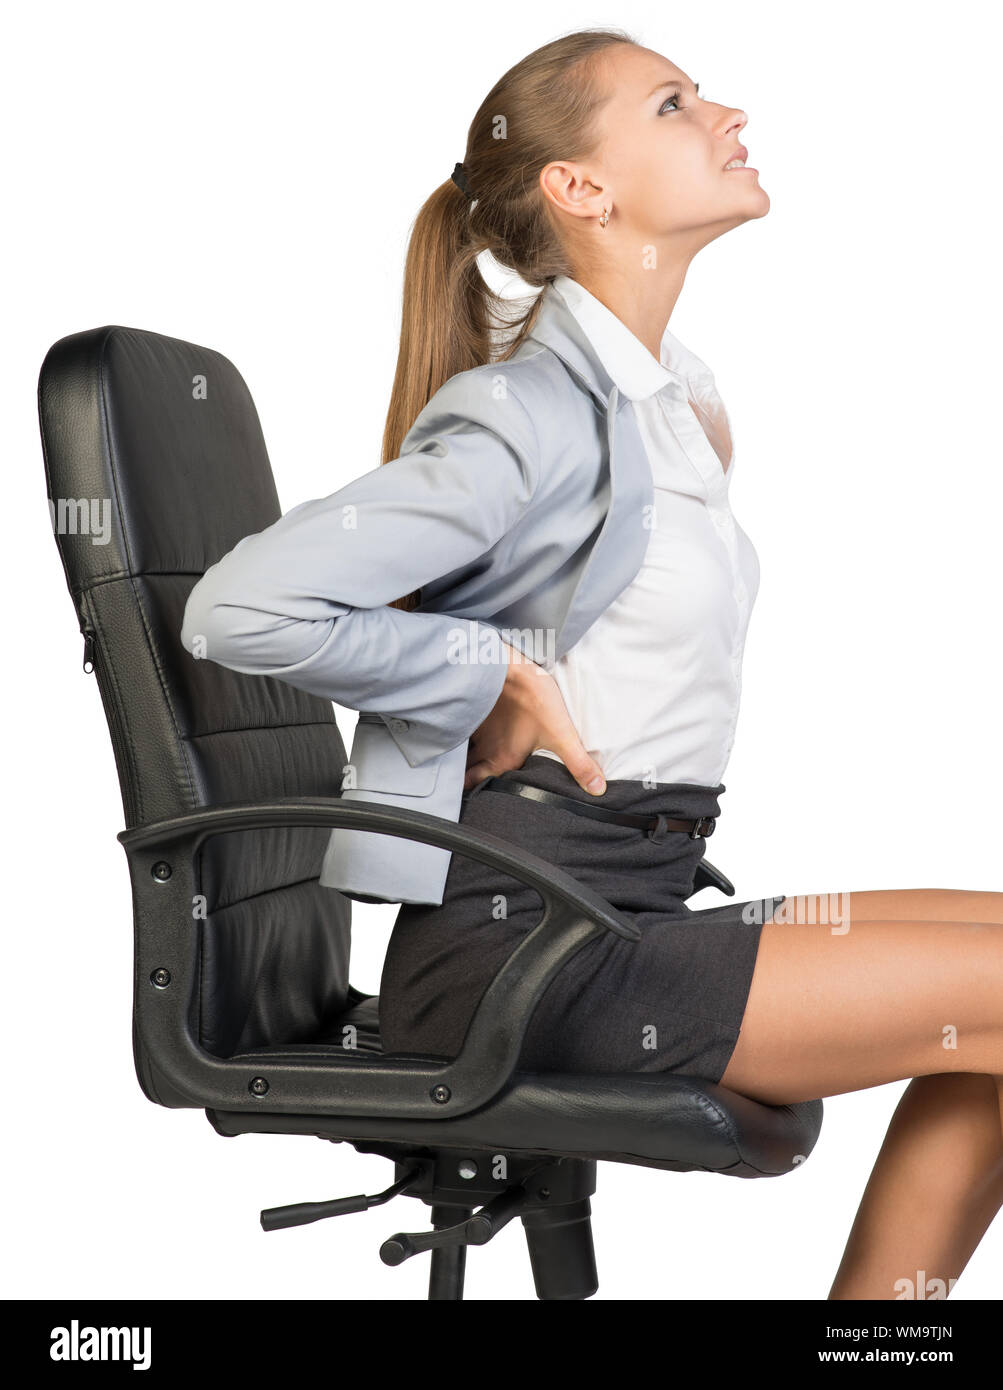 https://c8.alamy.com/comp/WM9TJN/businesswoman-with-lower-back-pain-from-sitting-on-office-chair-isolated-over-white-background-WM9TJN.jpg